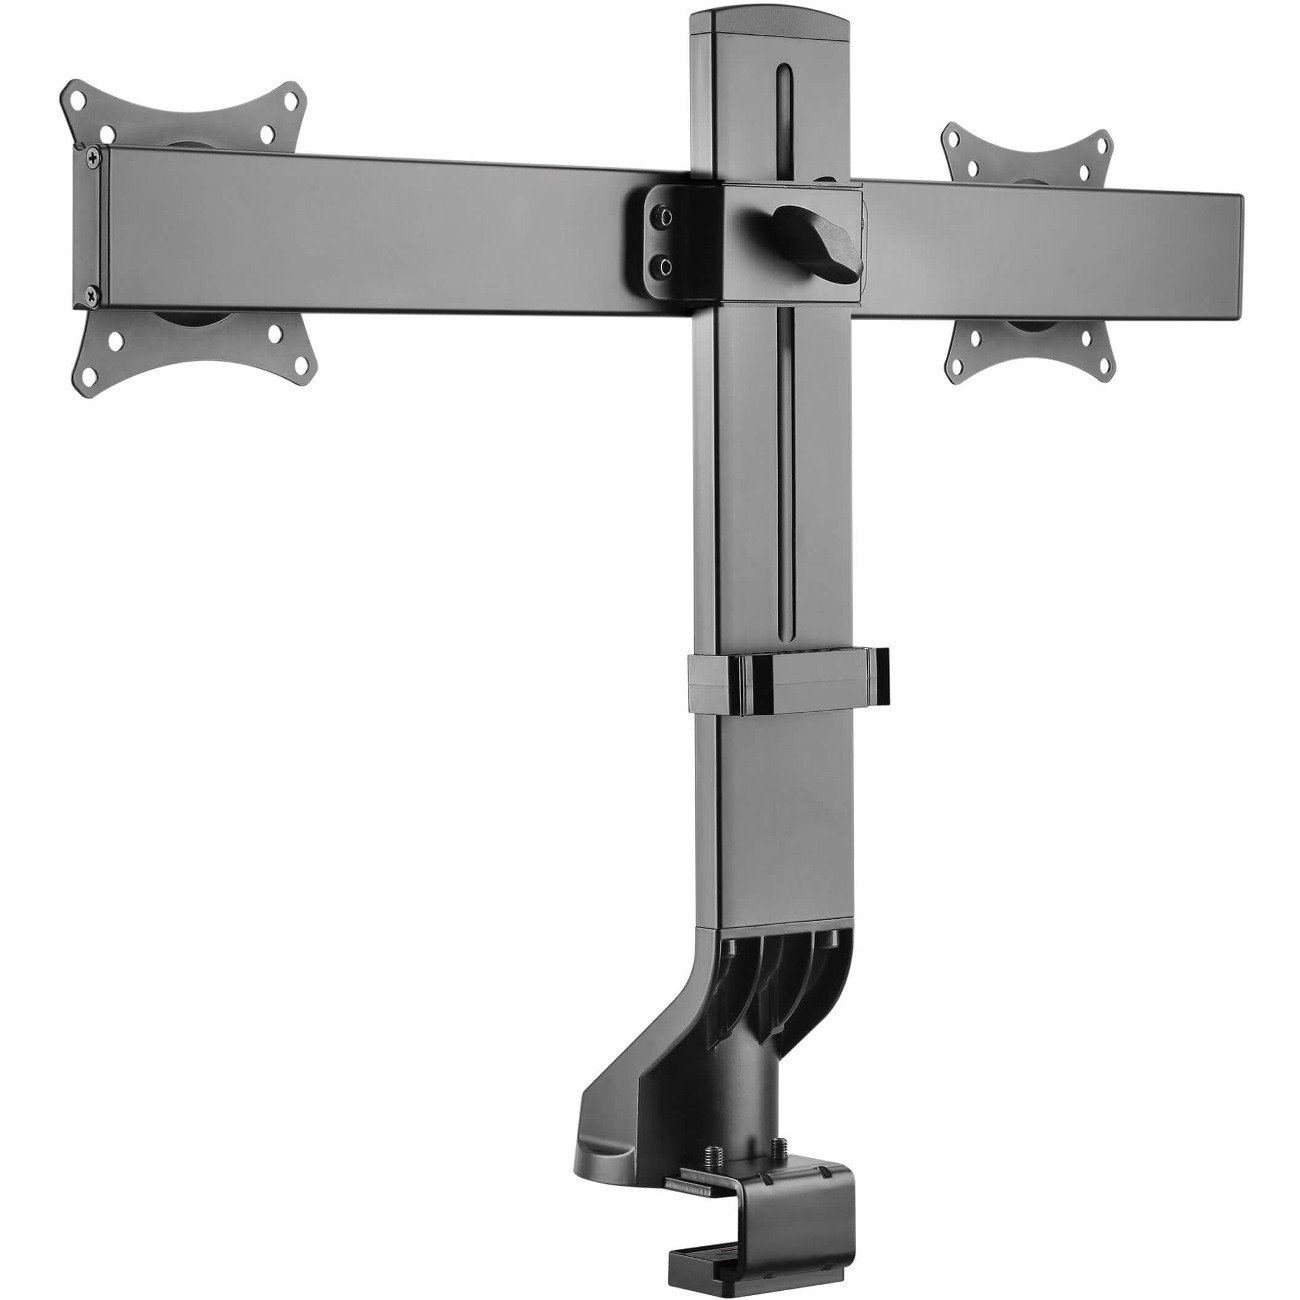 Tripp Lite by Eaton Dual-Display Monitor Arm with Desk Clamp and Grommet - Height Adjustable, 17" to 27" Monitors